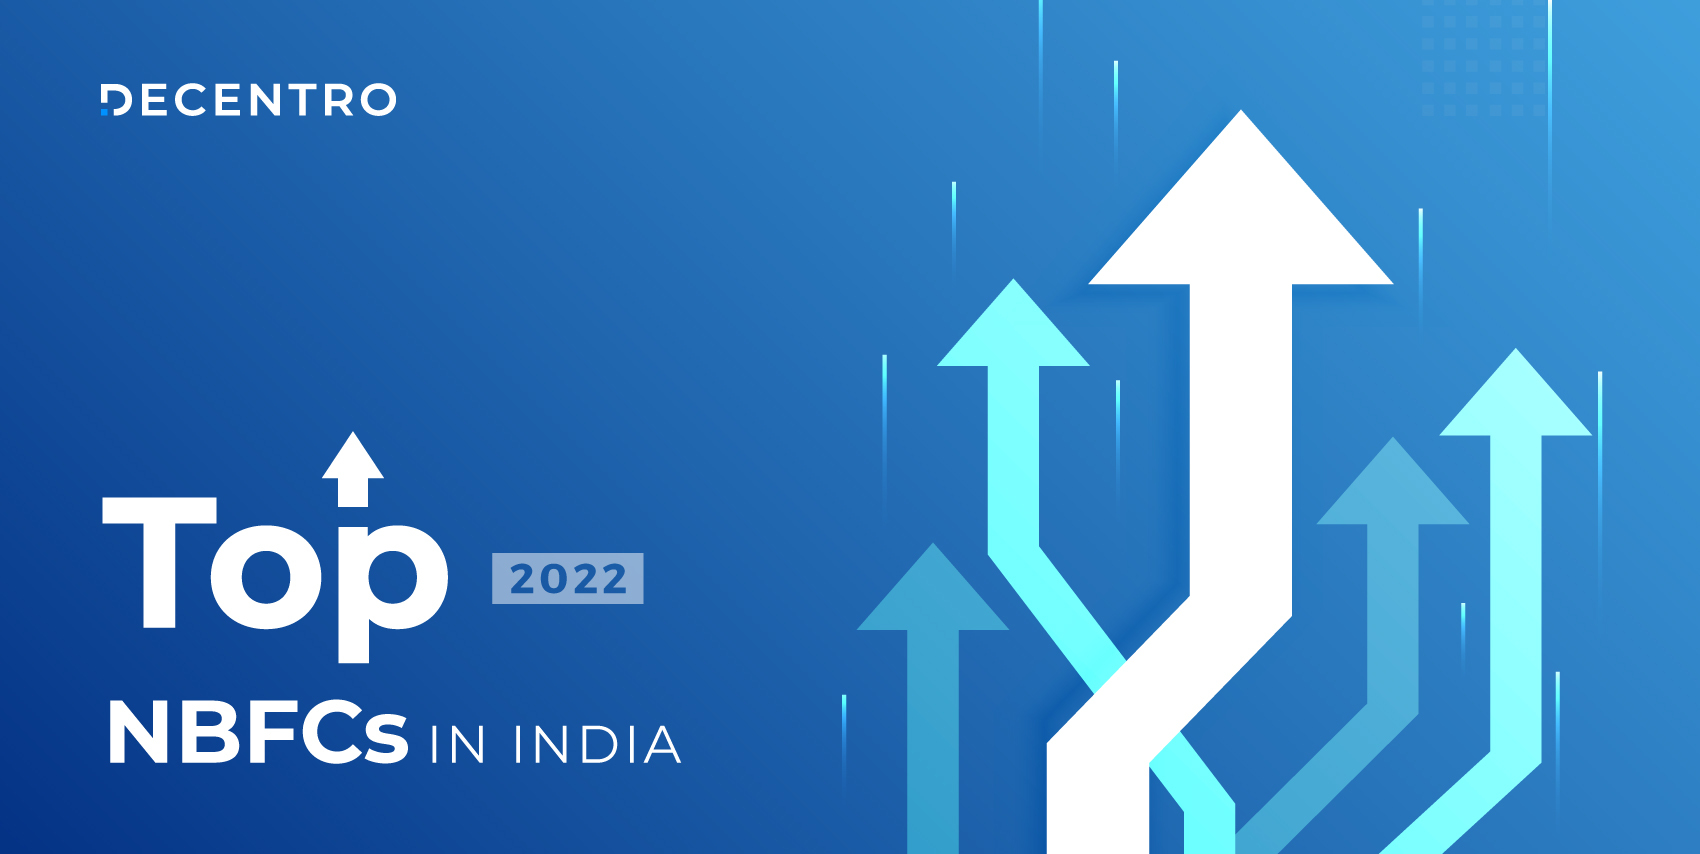 A listicle blog of the top and upcoming NBFCs in India for 2022.